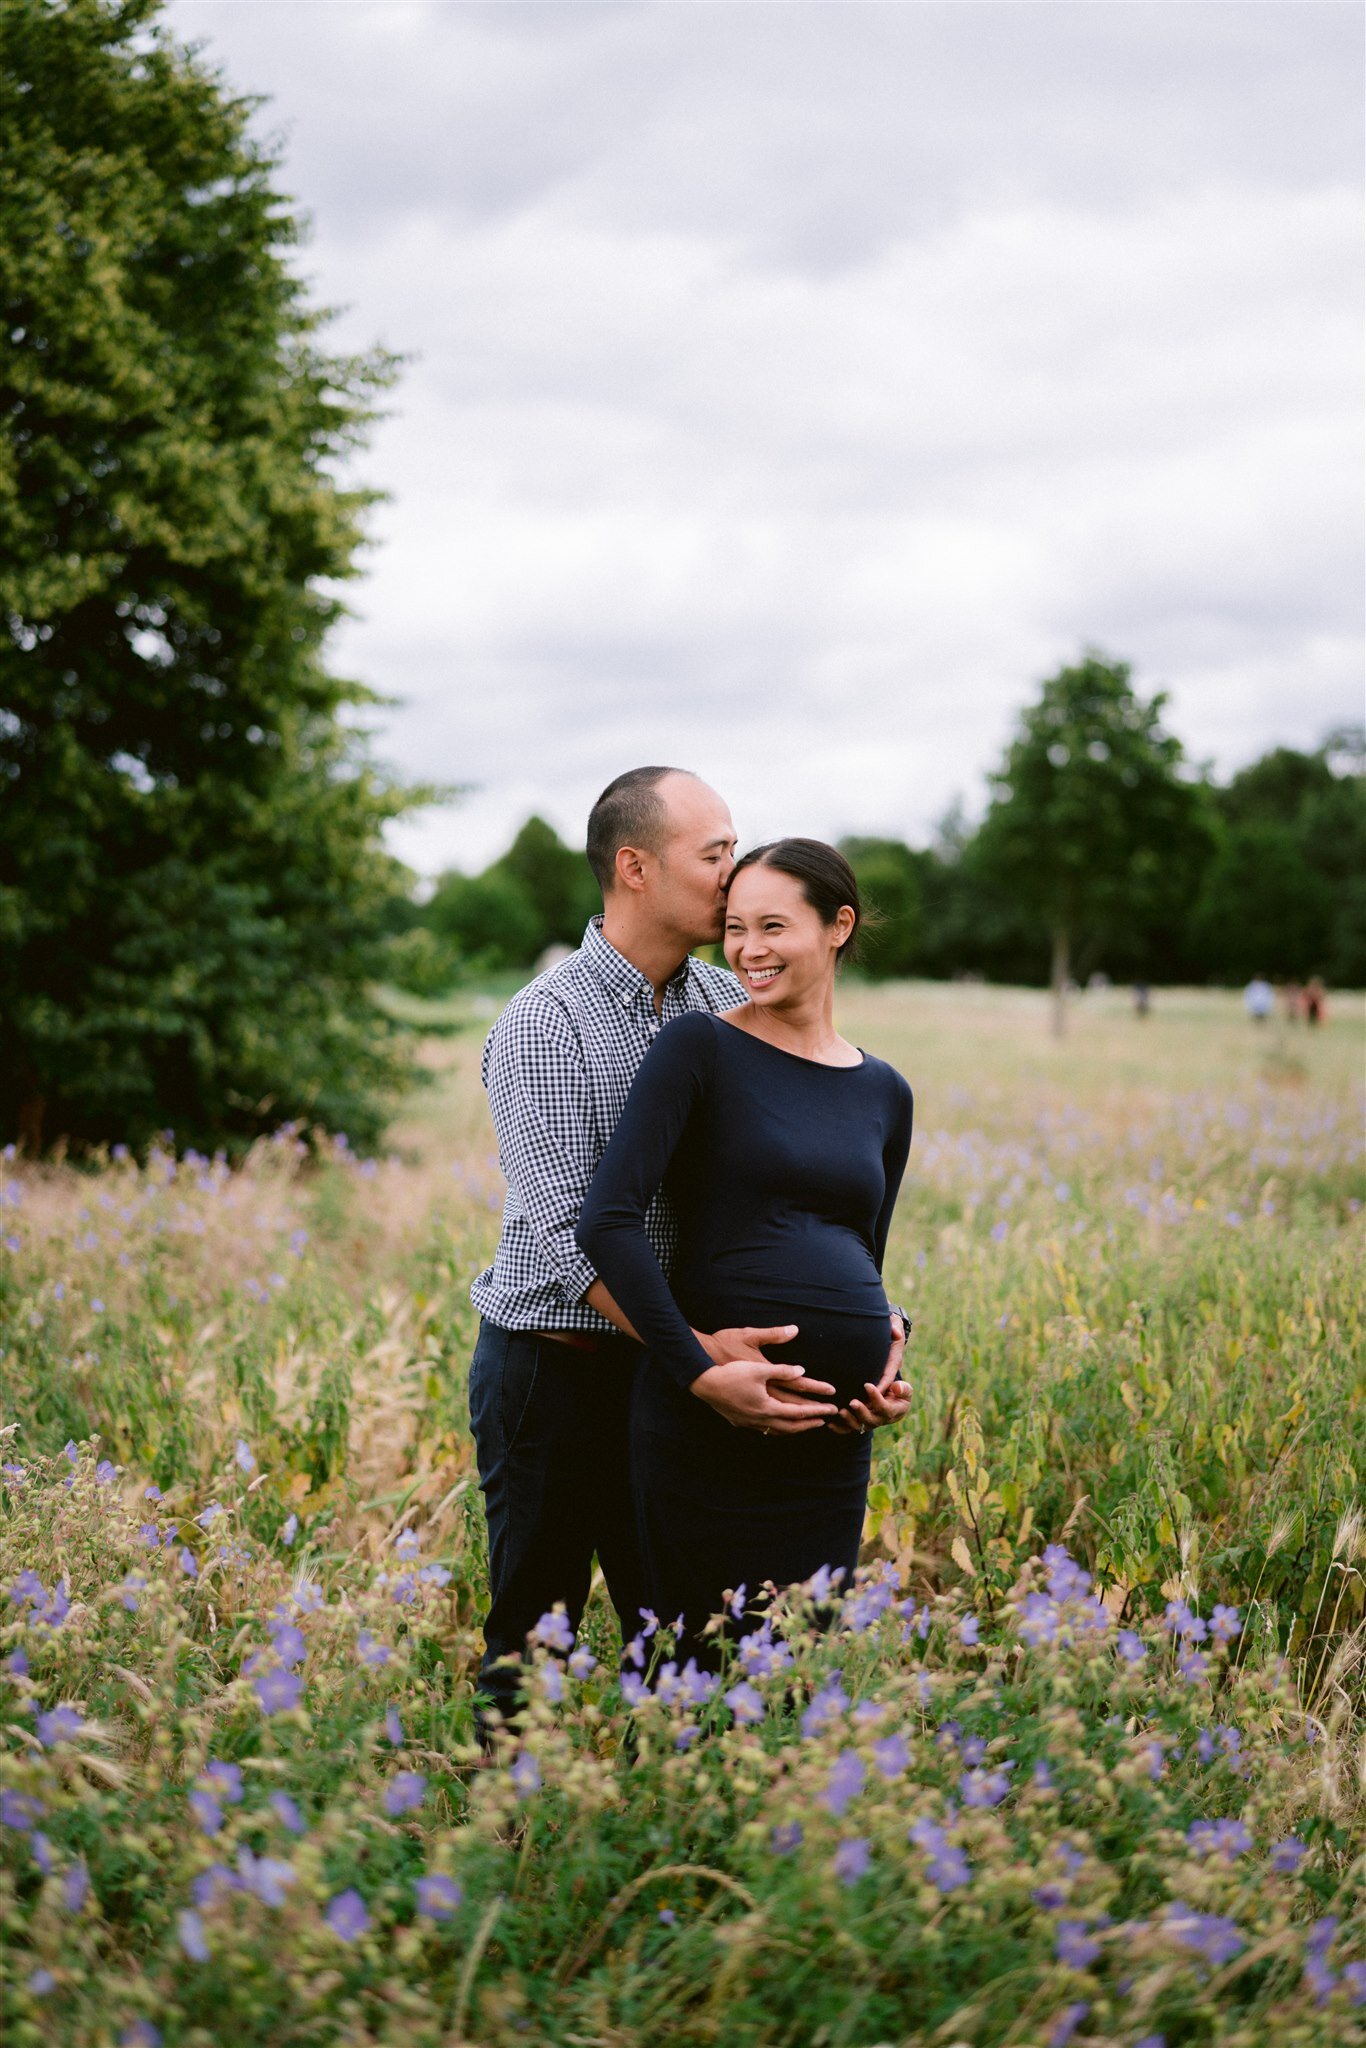 Natural Maternity Portrait Photographer in London